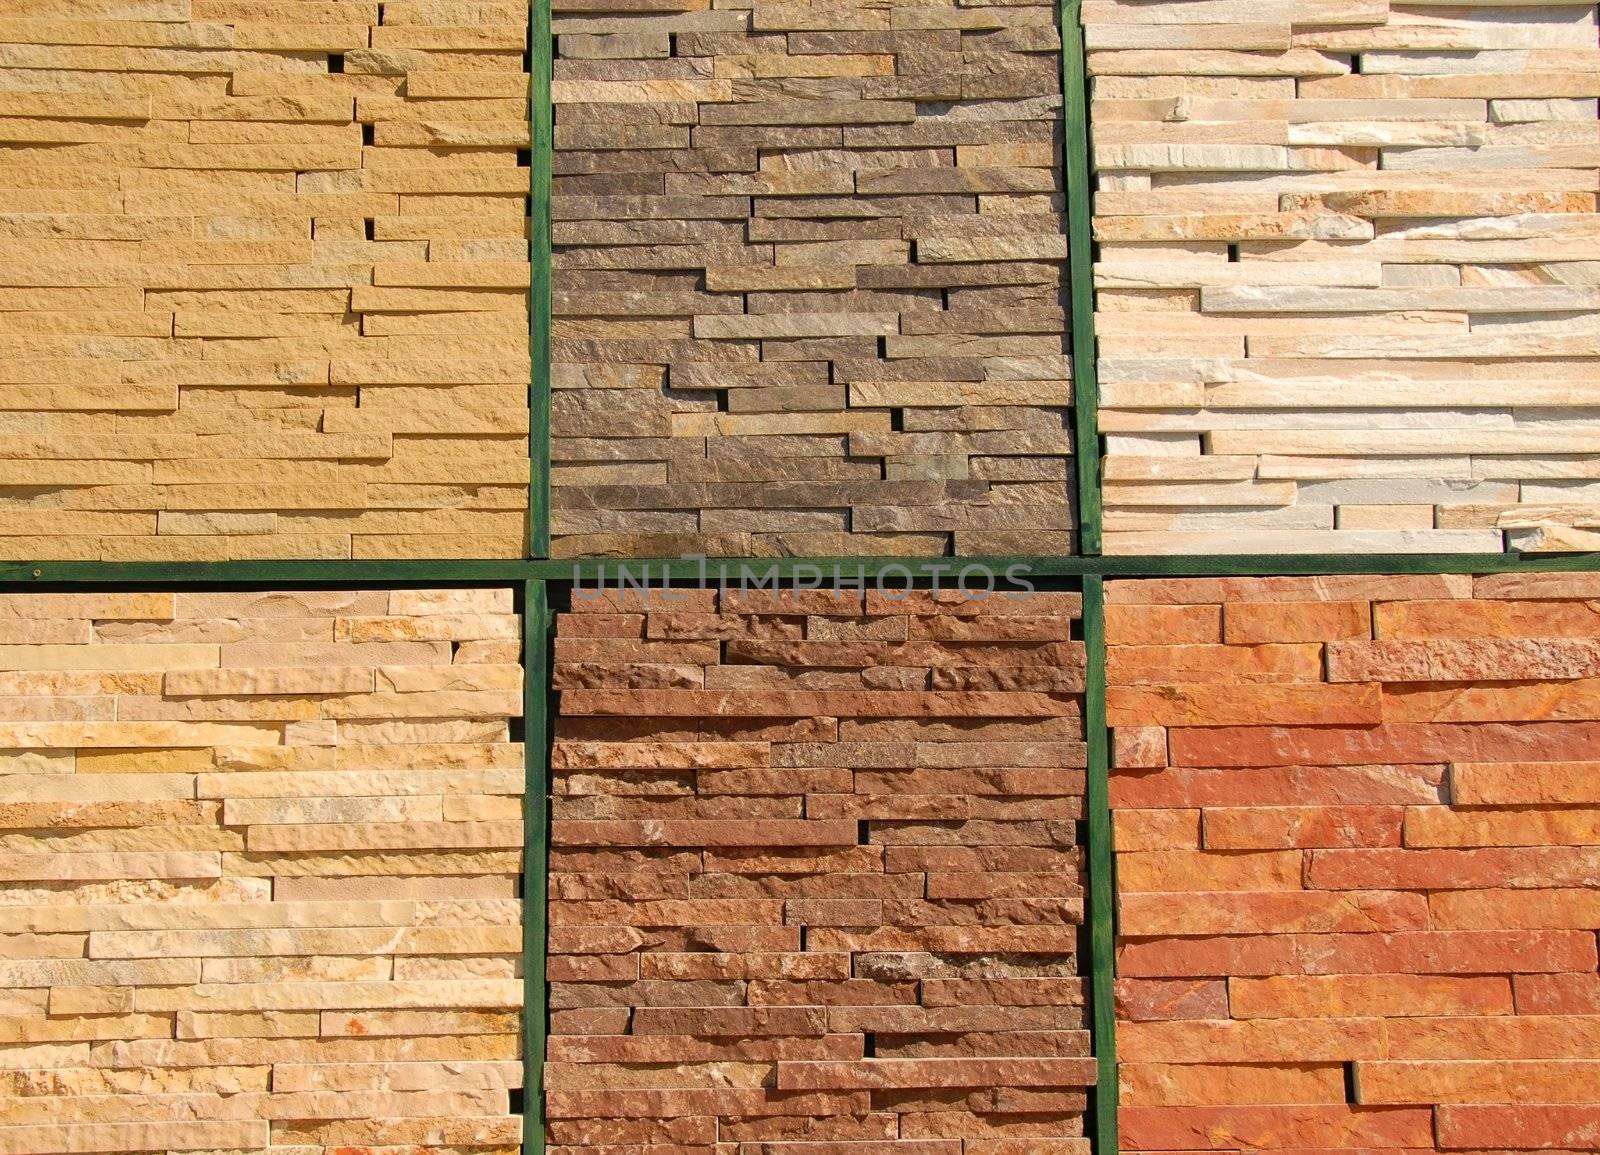 stone construction materials textures for wall and facade design